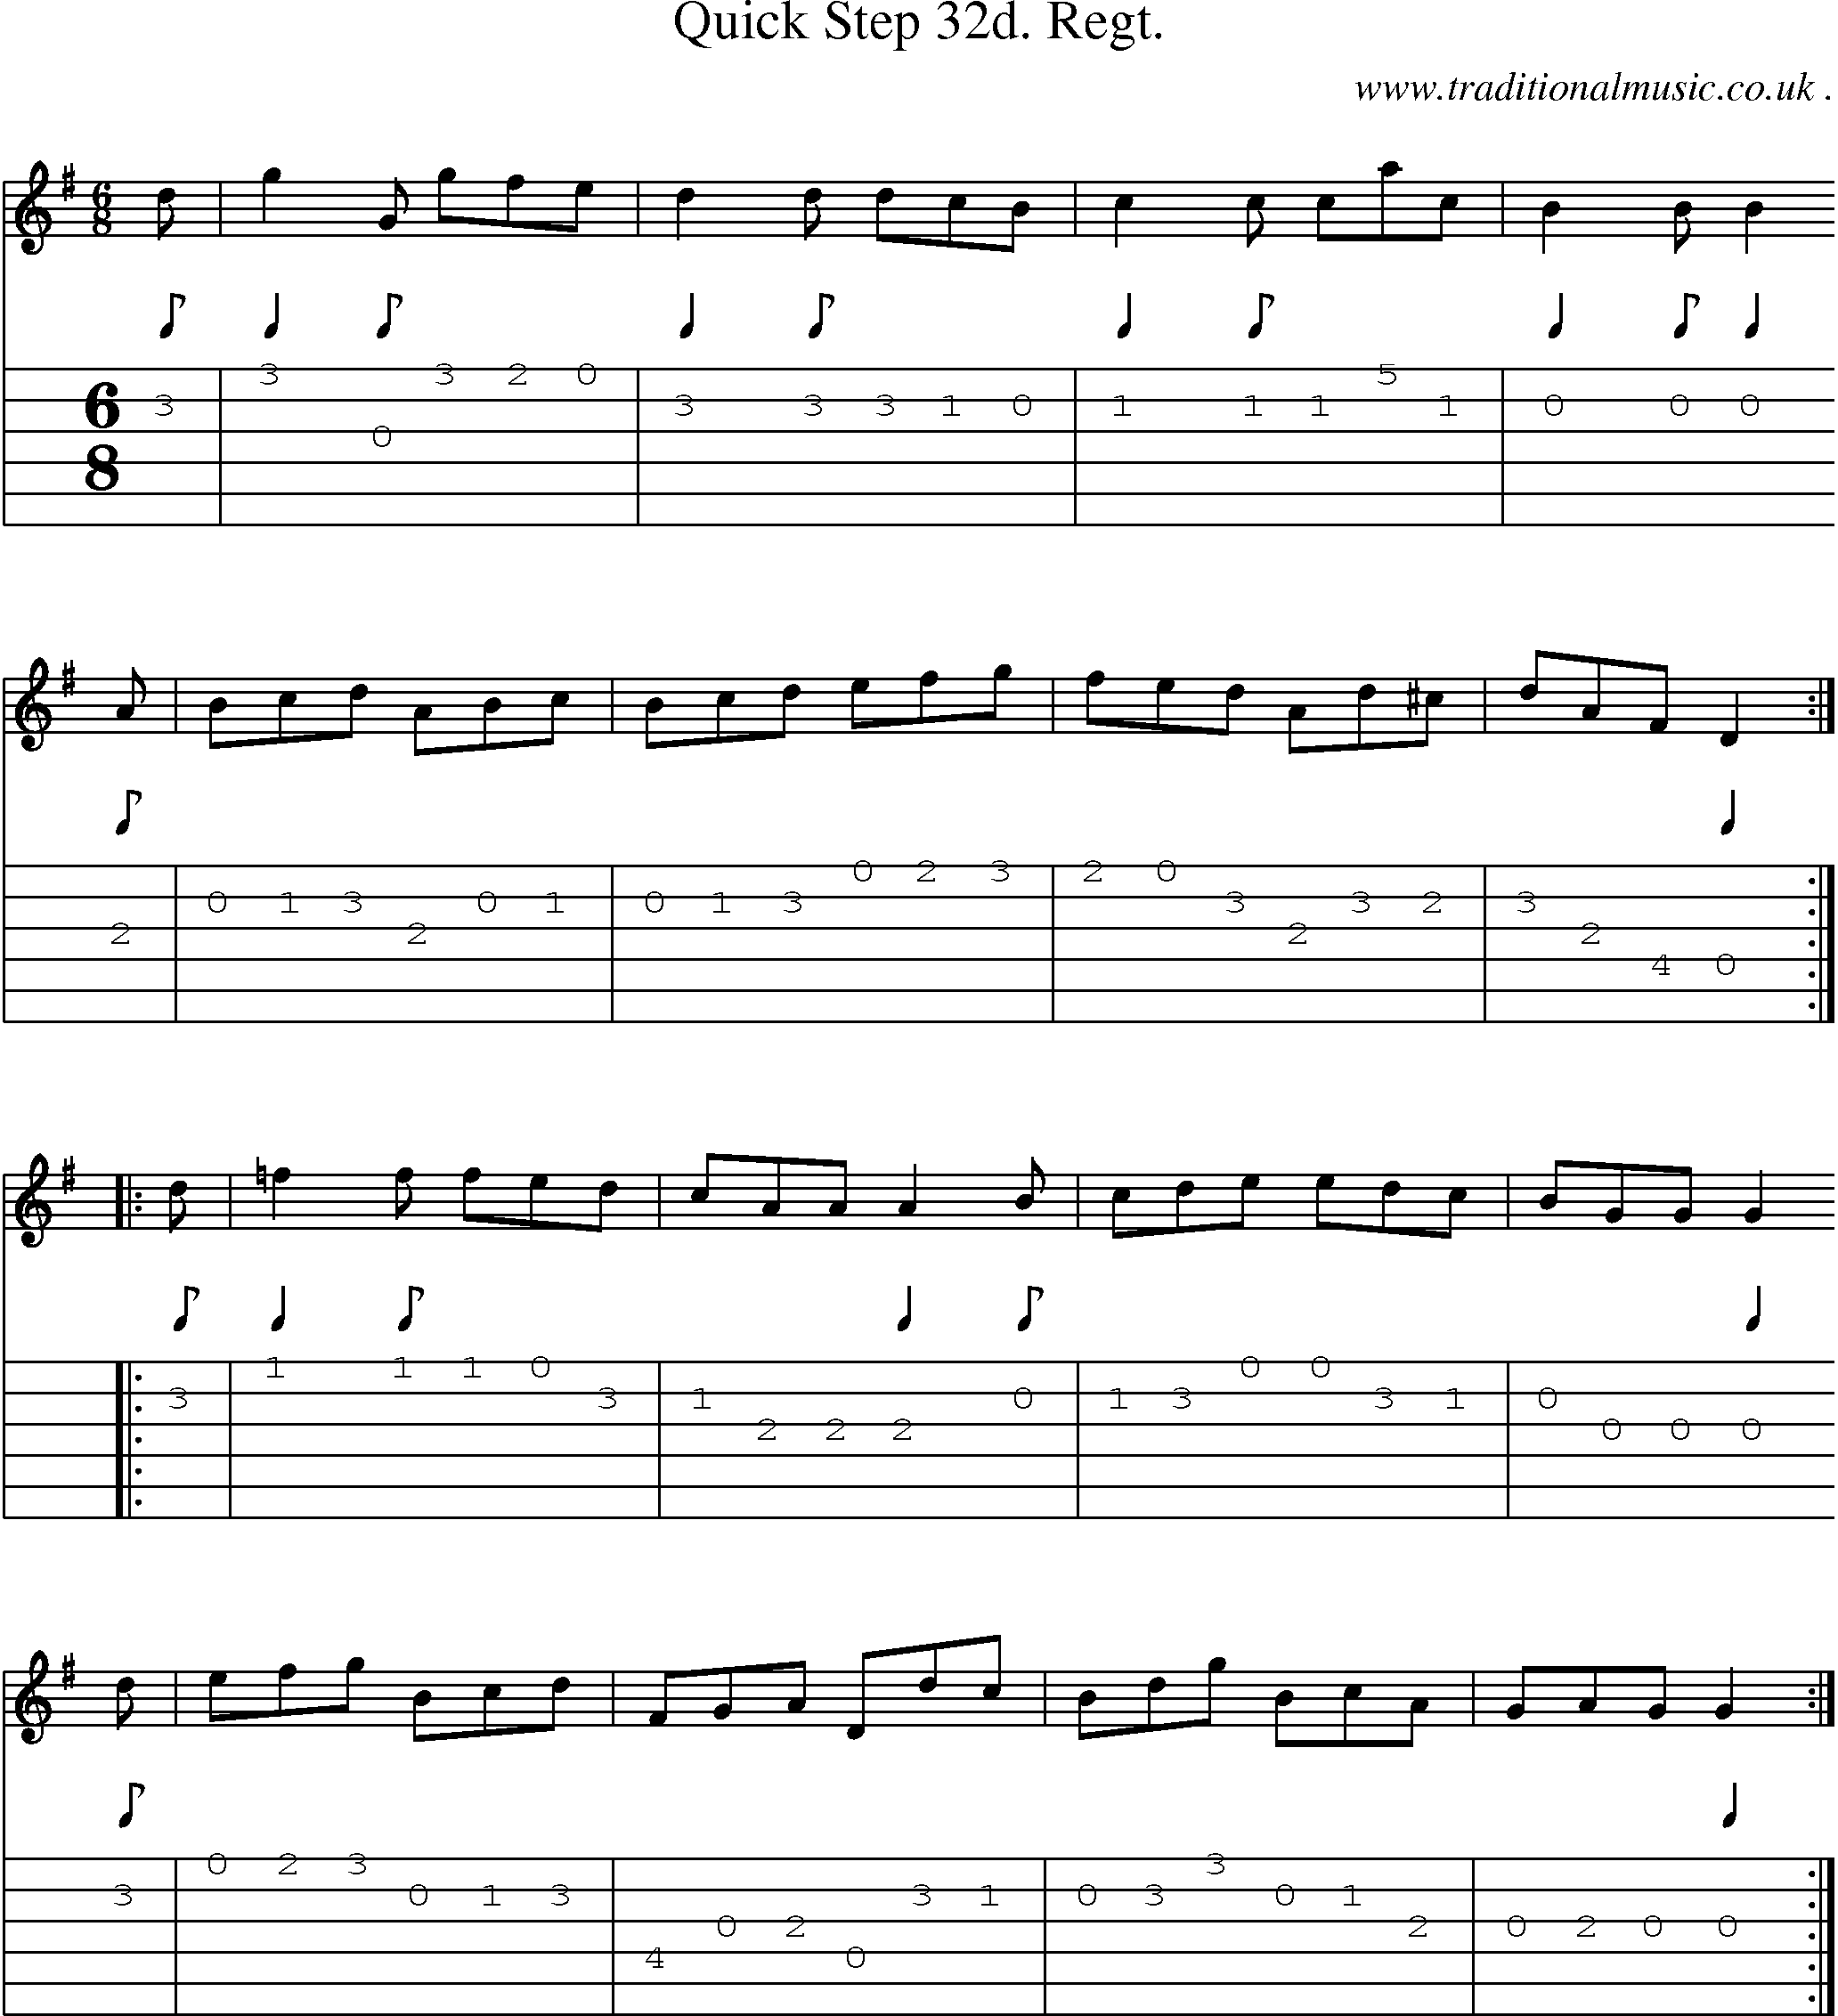 Sheet-music  score, Chords and Guitar Tabs for Quick Step 32d Regt